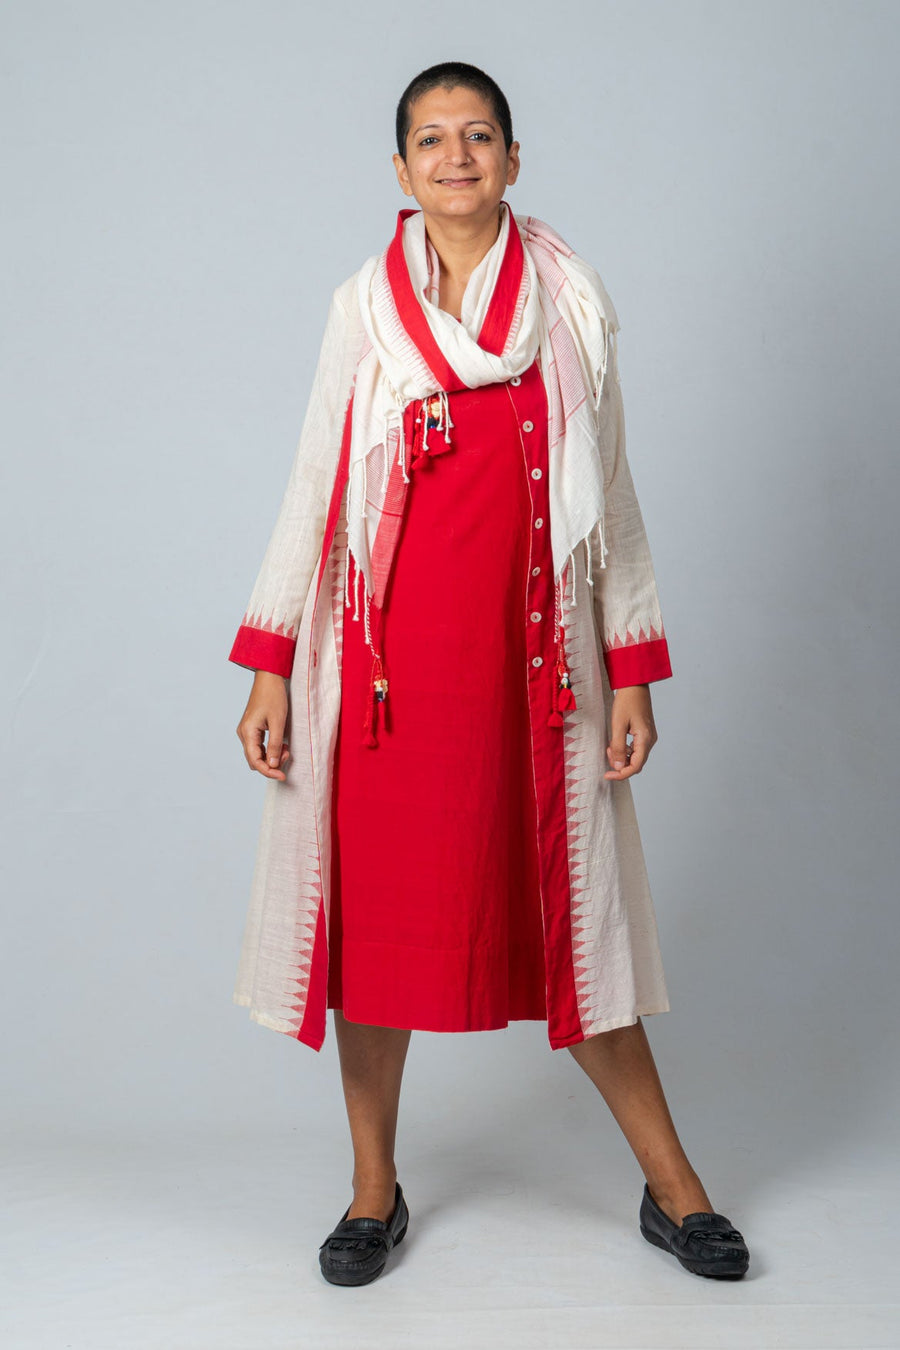 Red Temple Border Jacket with Organic Cotton Dress and Scarf Accessory - HAMSINI SET